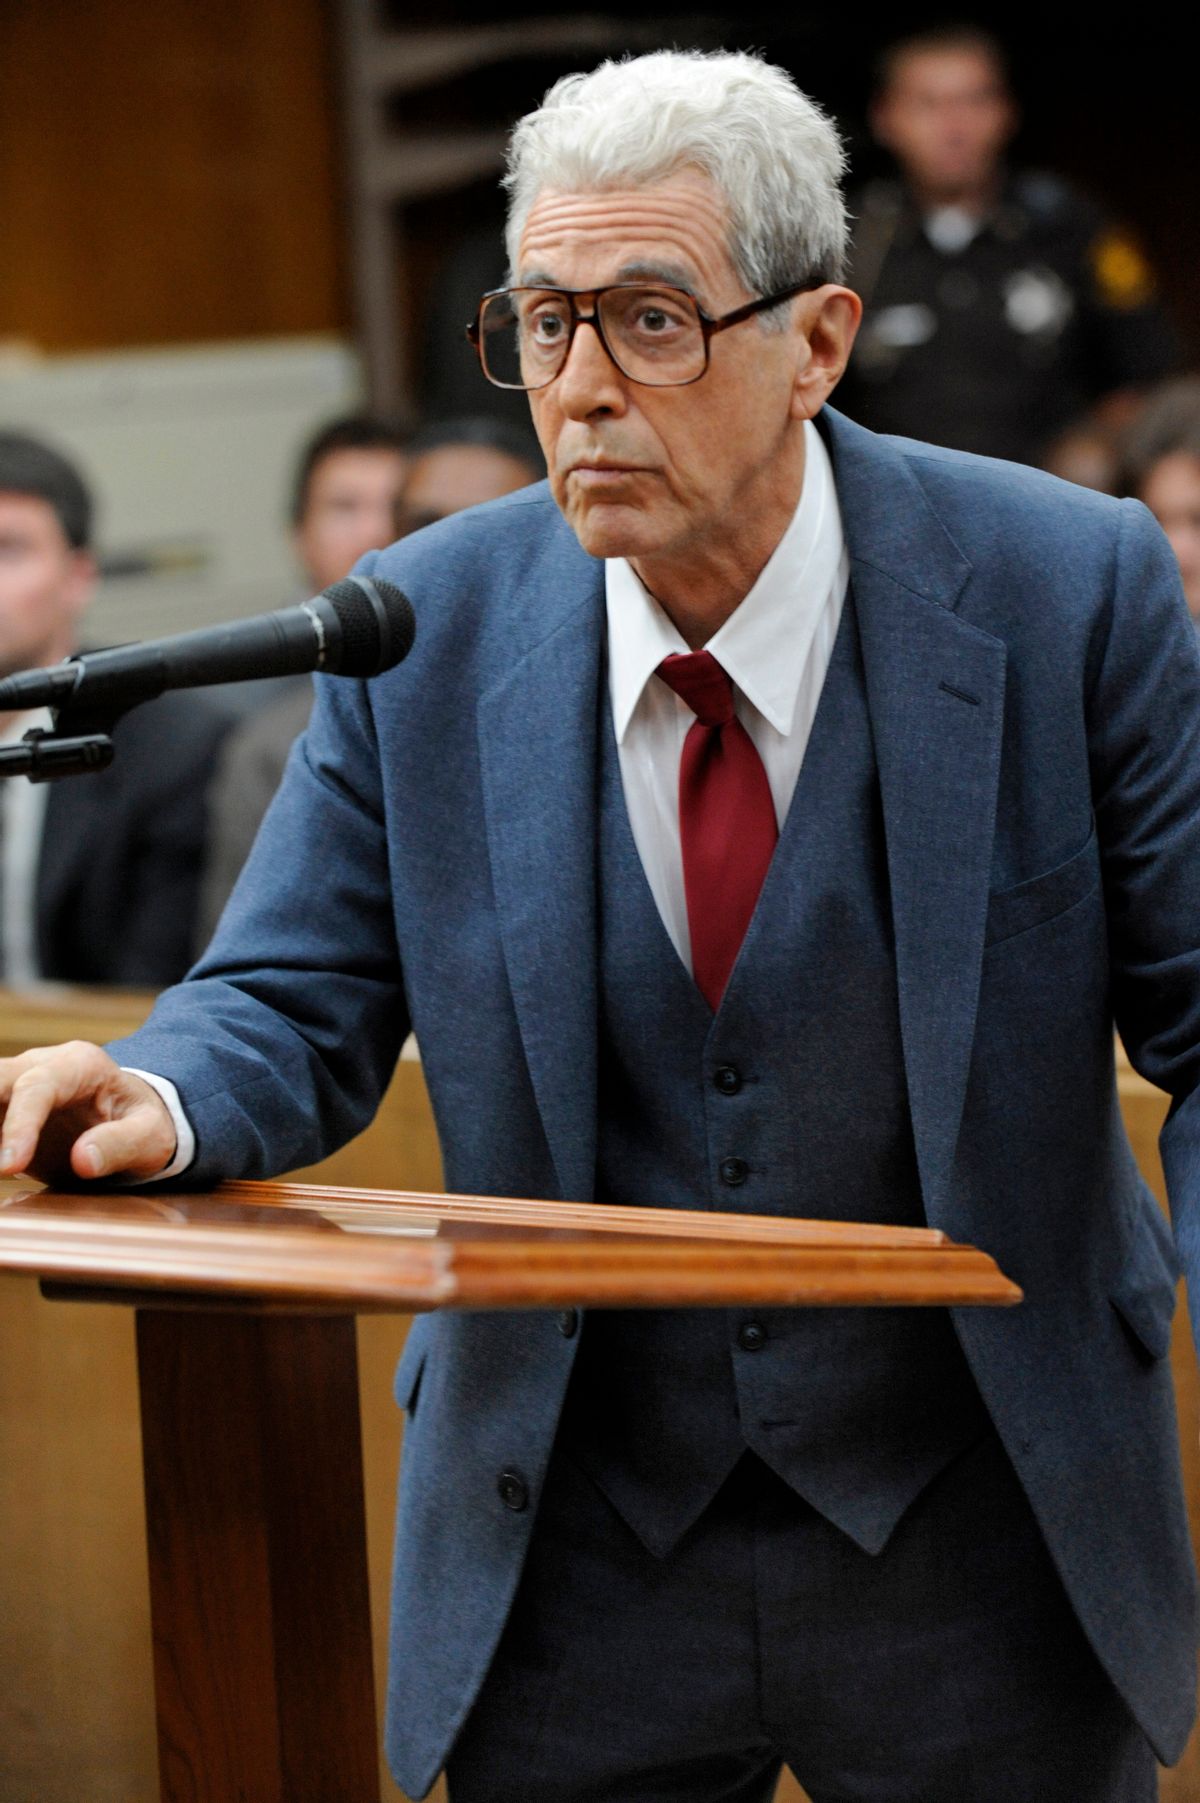 Al Pacino as Dr. Jack Kevorkian in HBO's "You Don't Know Jack."